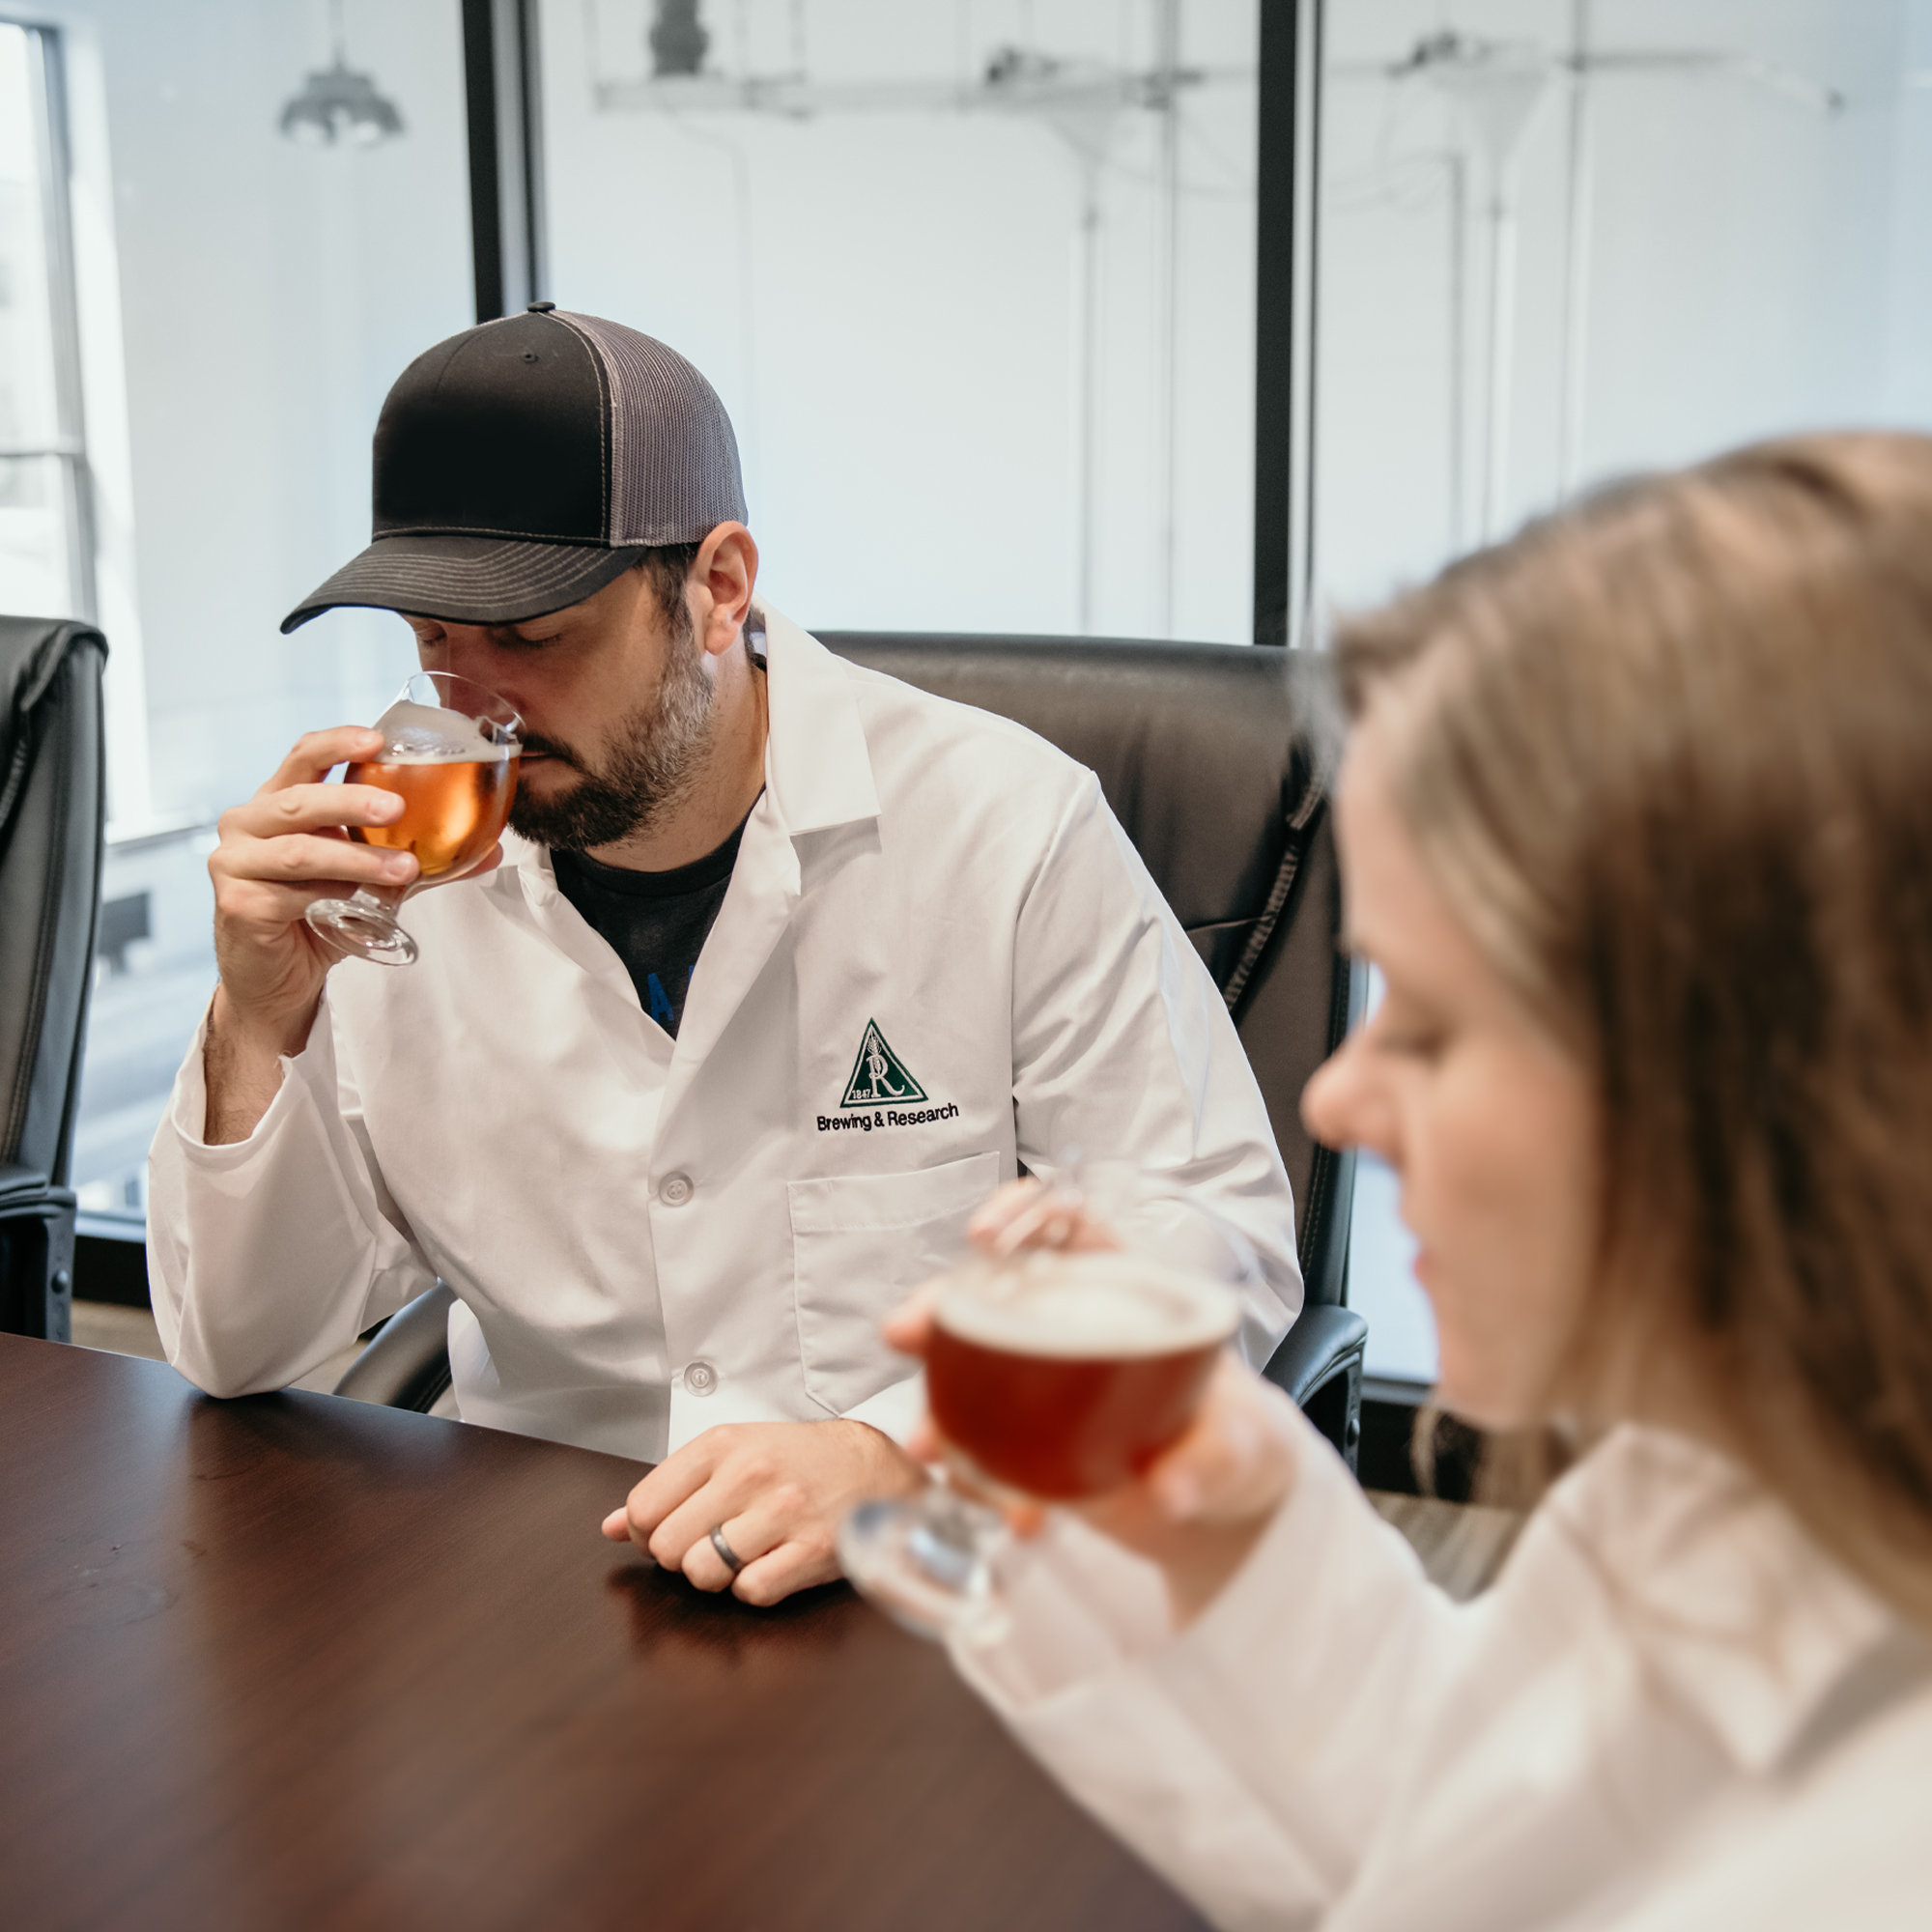 Brewing scientists evaluating samples